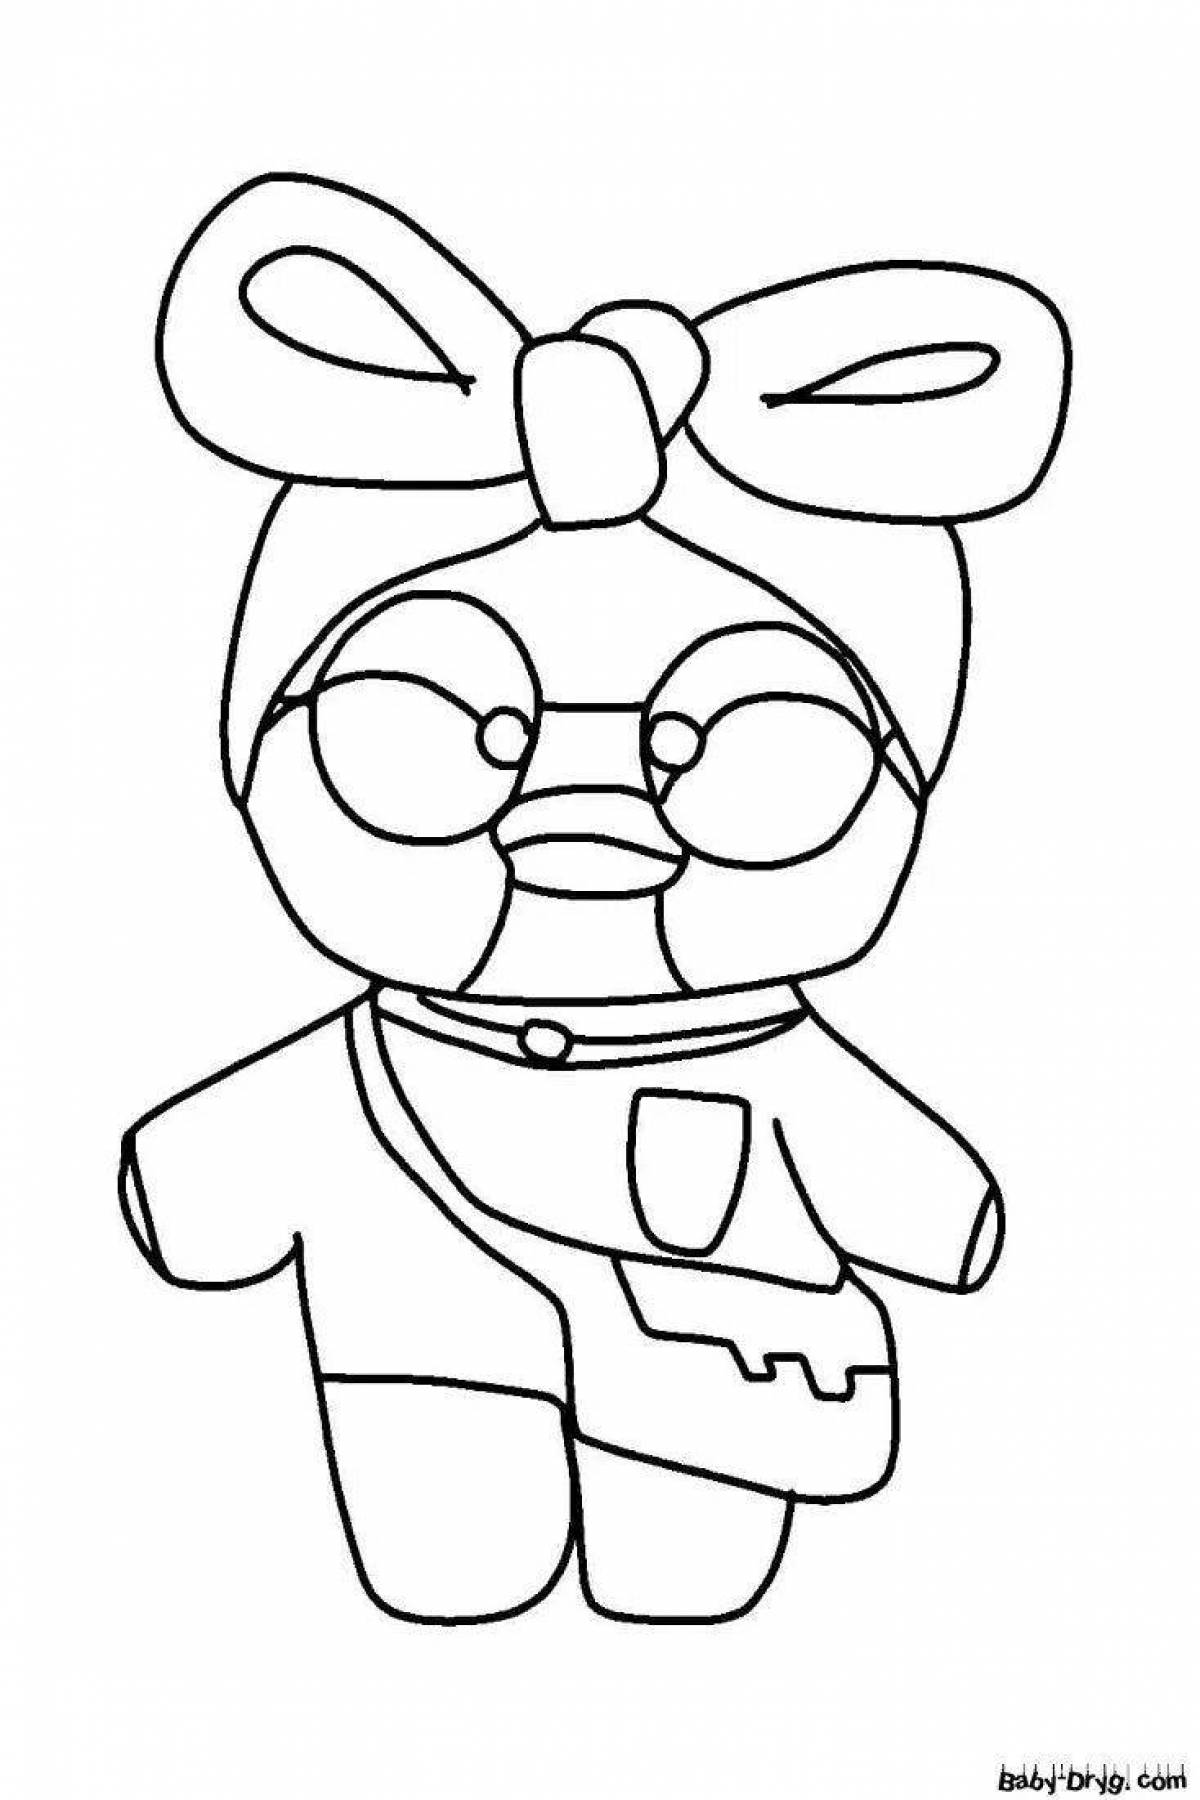 Lalafanfan Duck Coloring Page Detailed Coloring Page